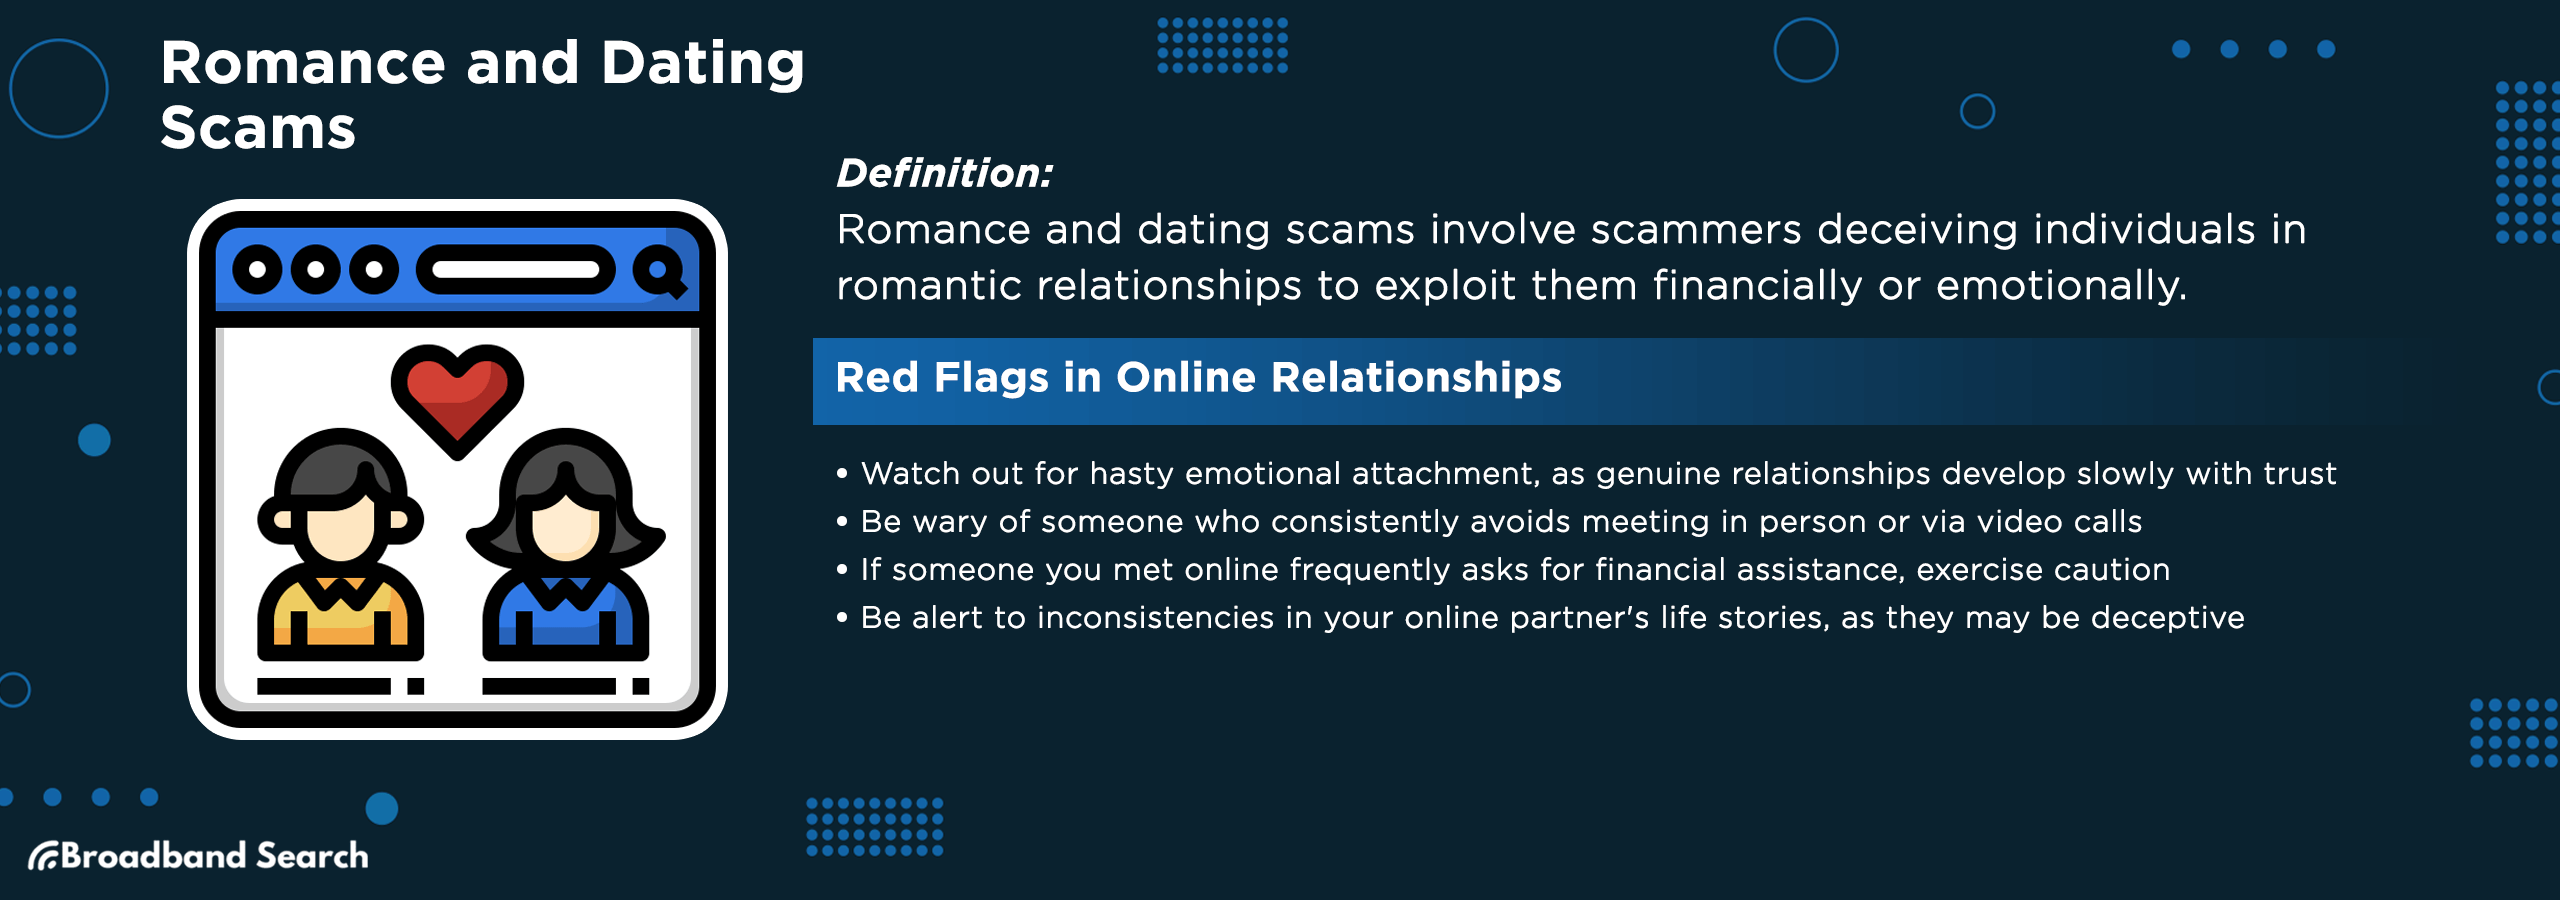 Definition and signs of romance and dating scams